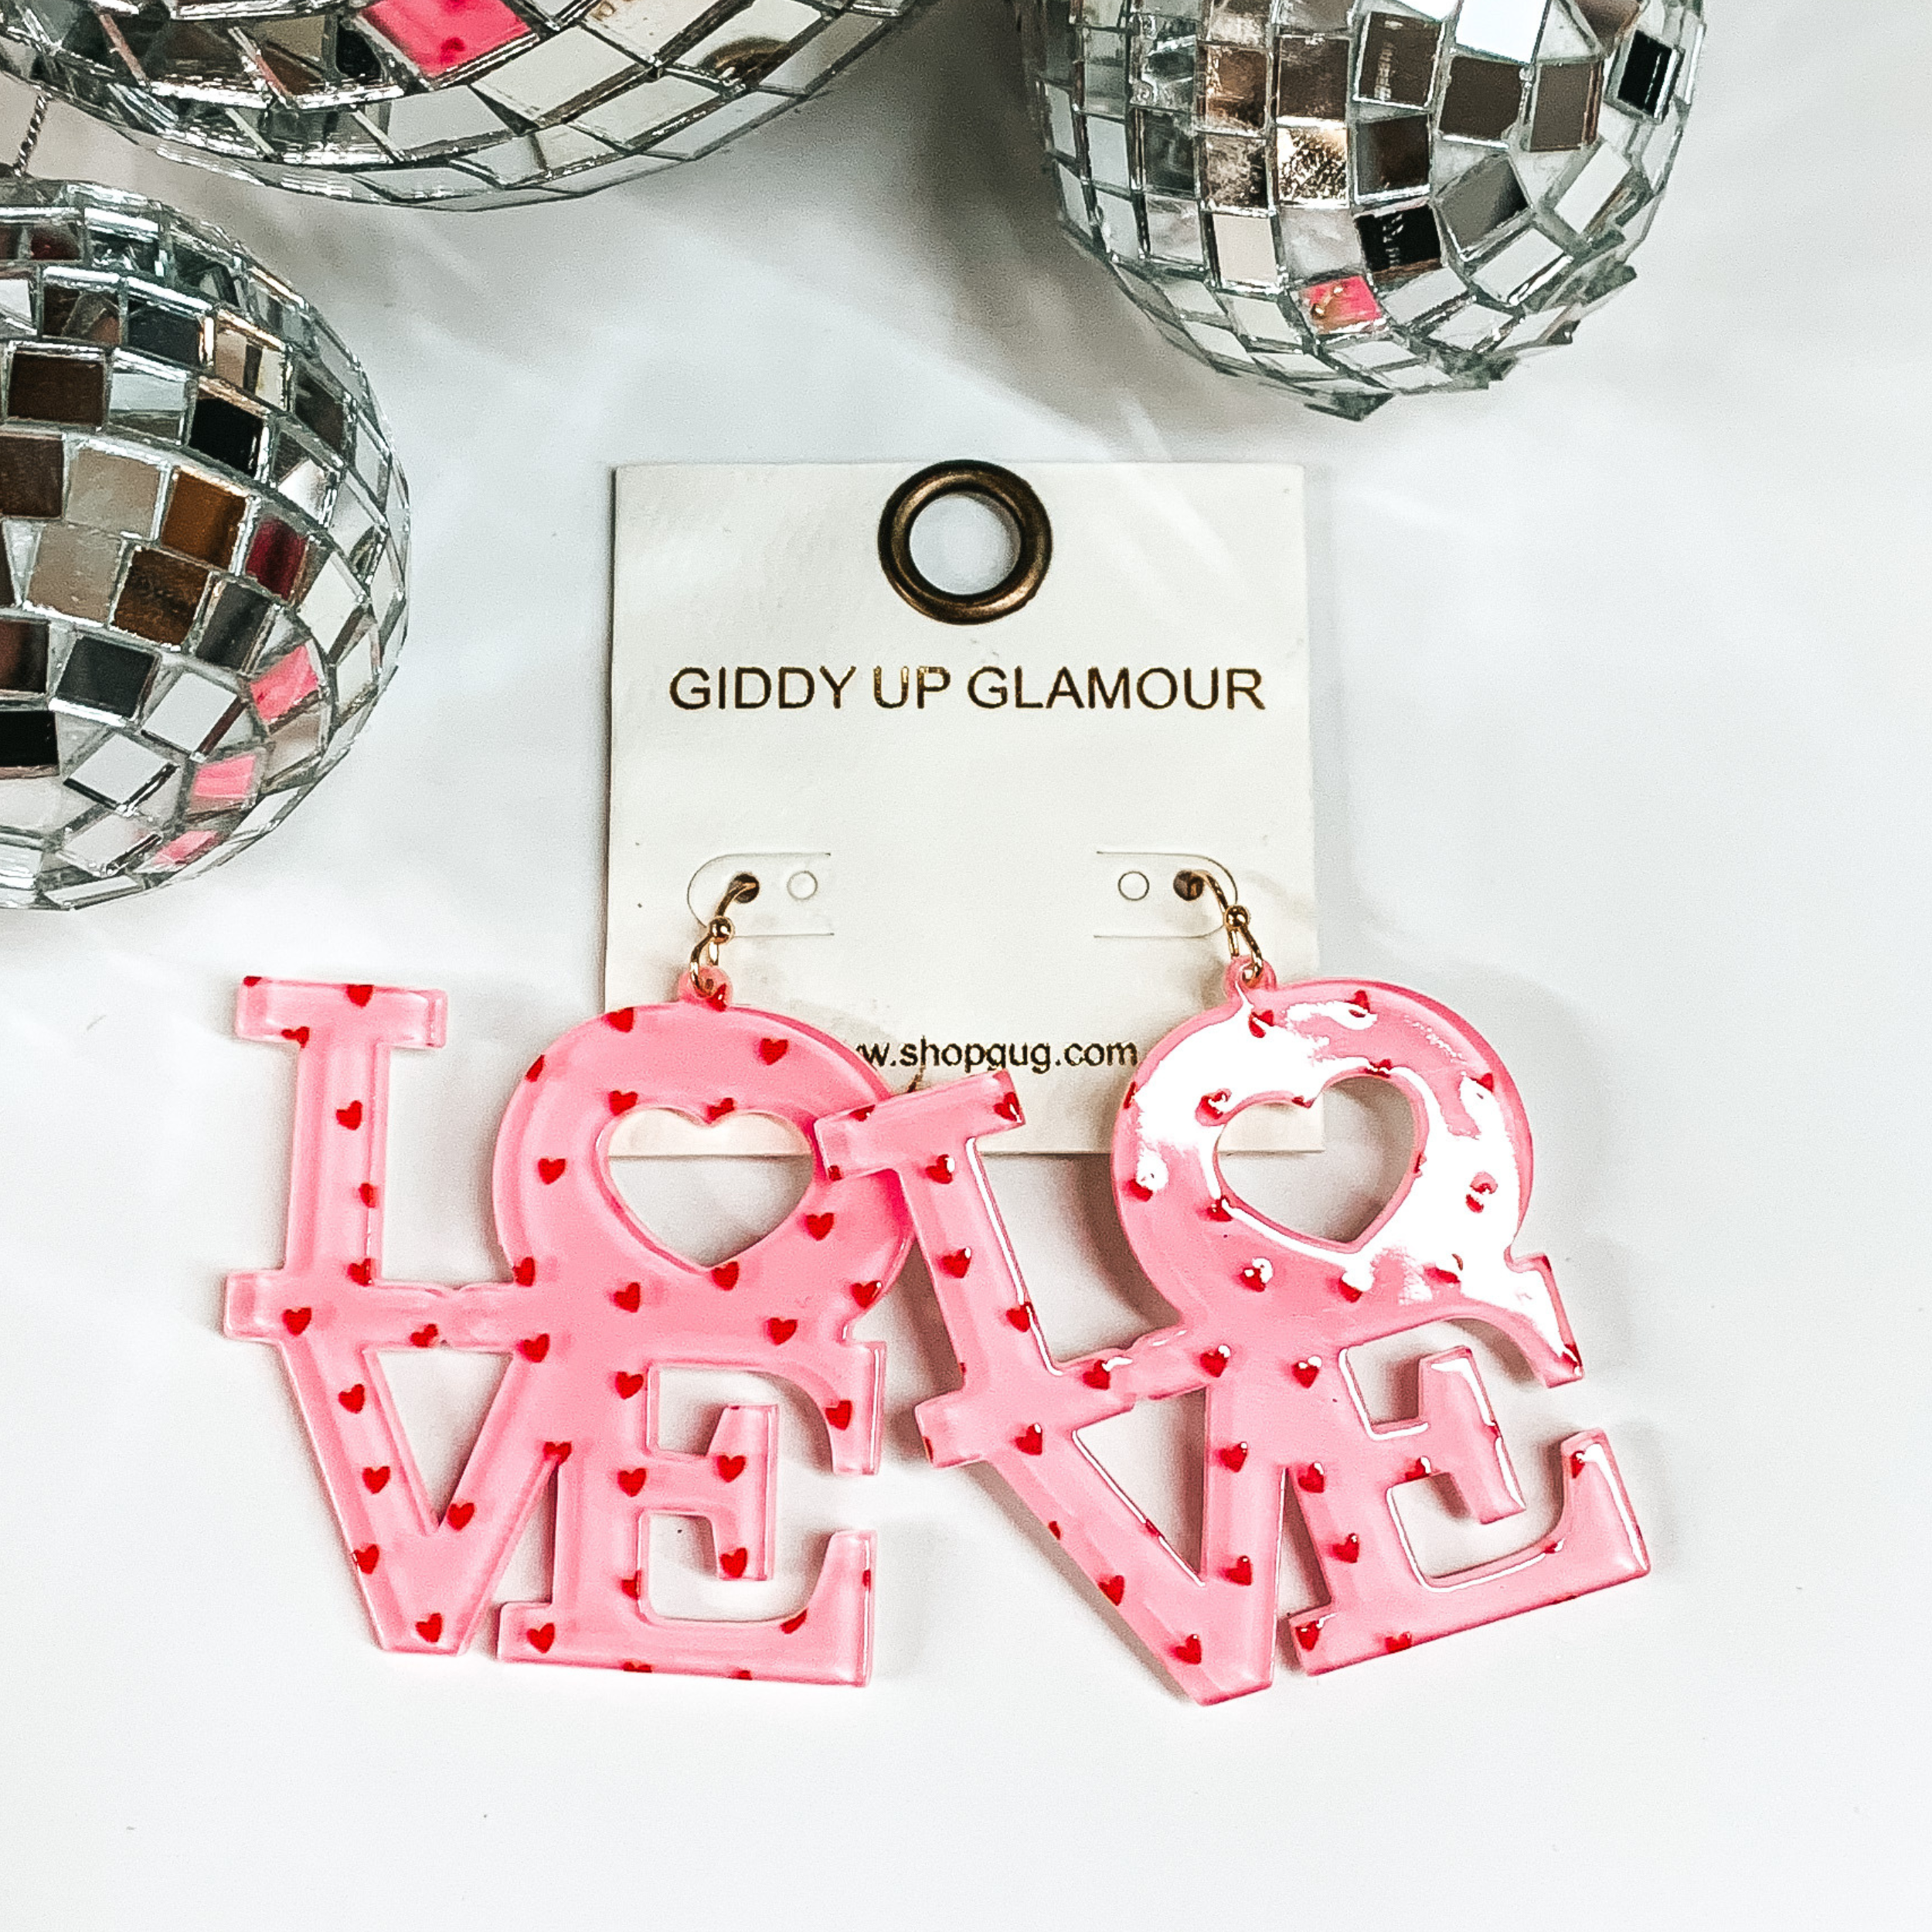 Block letter earrings in light pink that spell out the words LOVE. There are little red hearts on the earrings that add a little extra valentine fun. Earrings are on white back ground with silver disco balls.